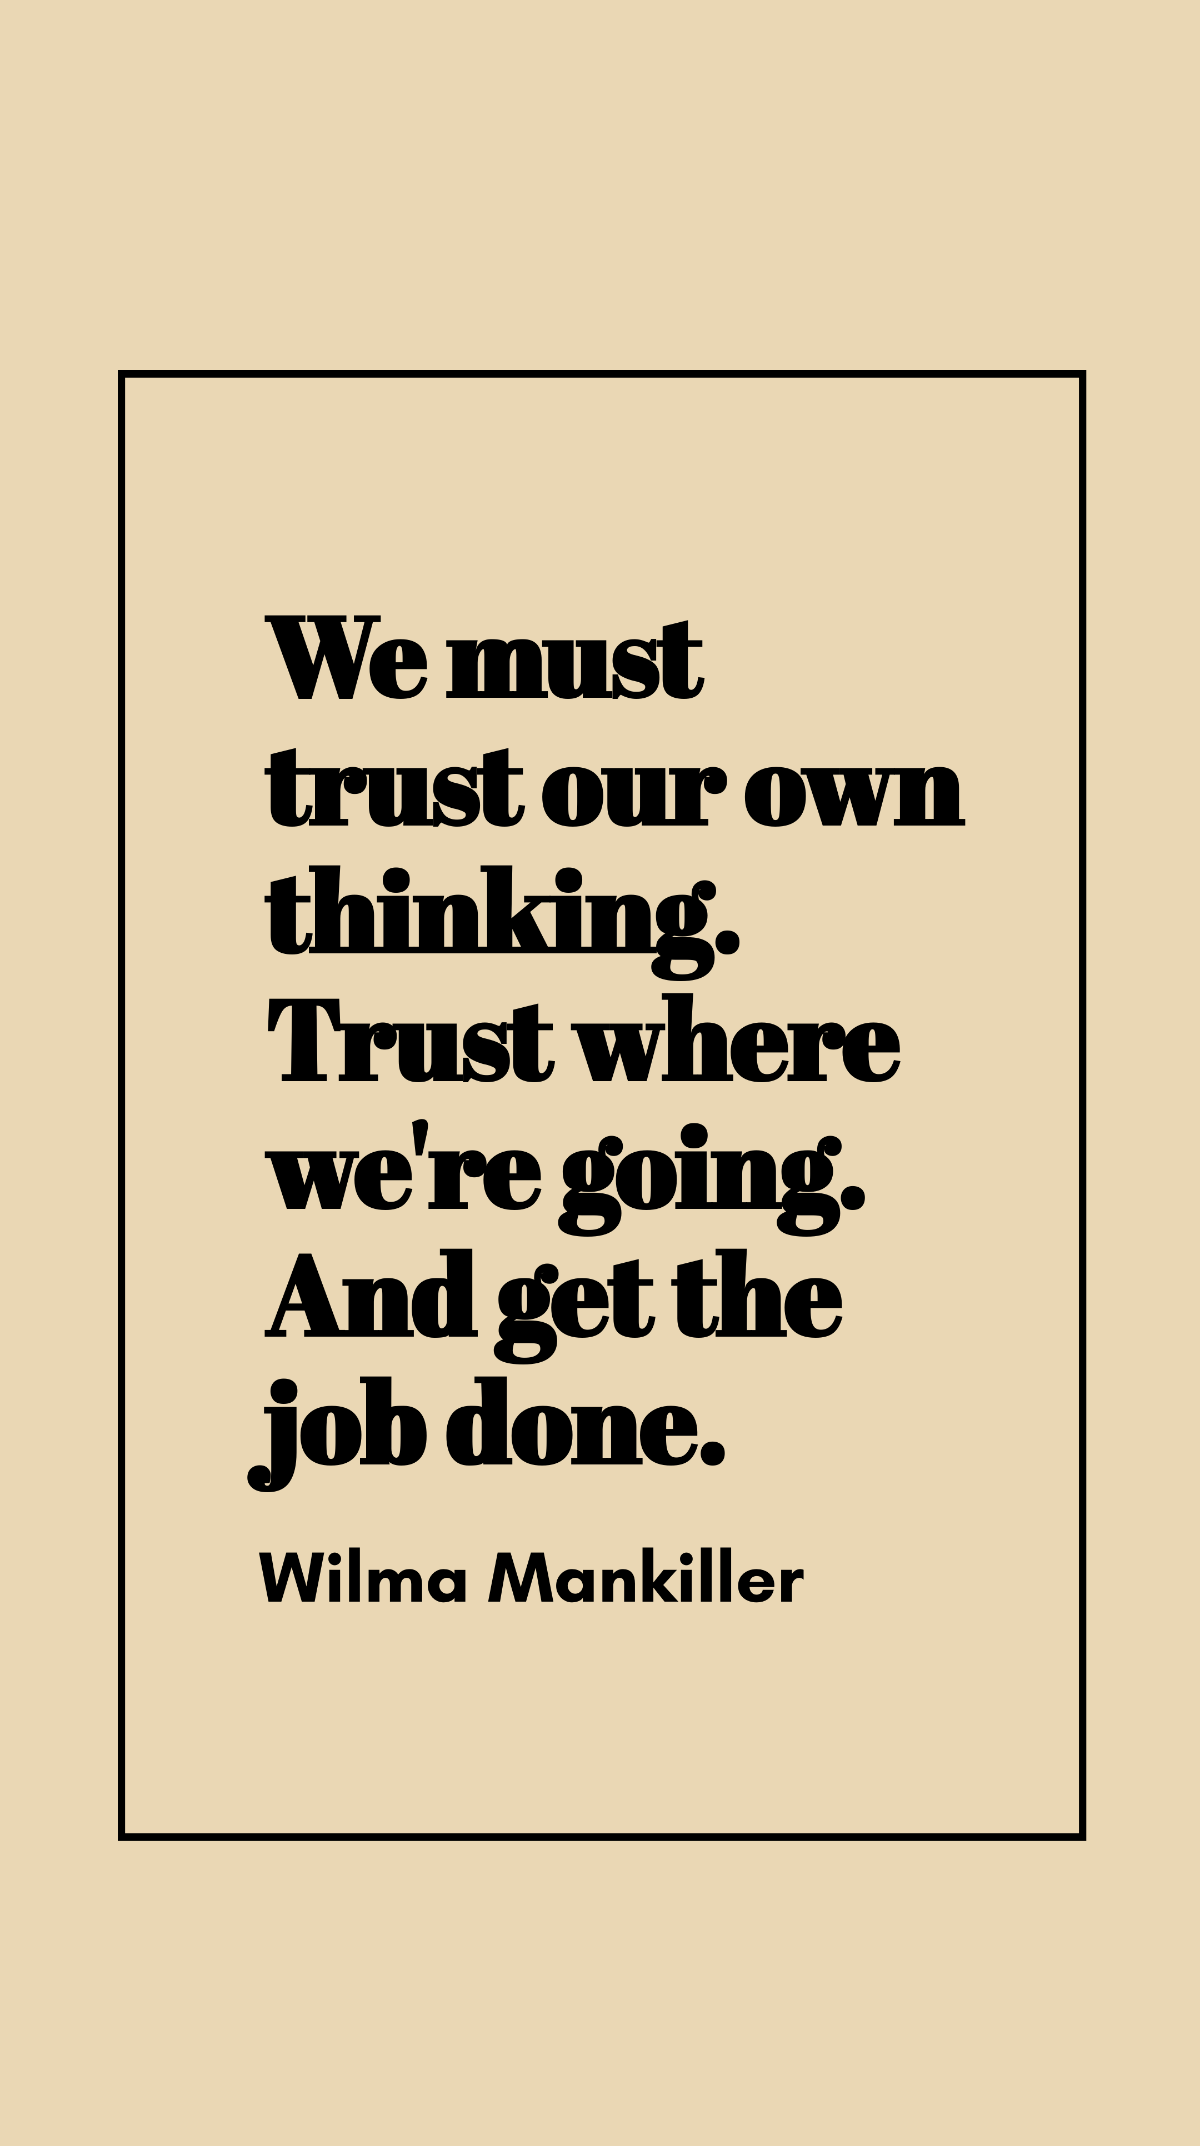 Wilma Mankiller - We must trust our own thinking. Trust where we're going. And get the job done. Template